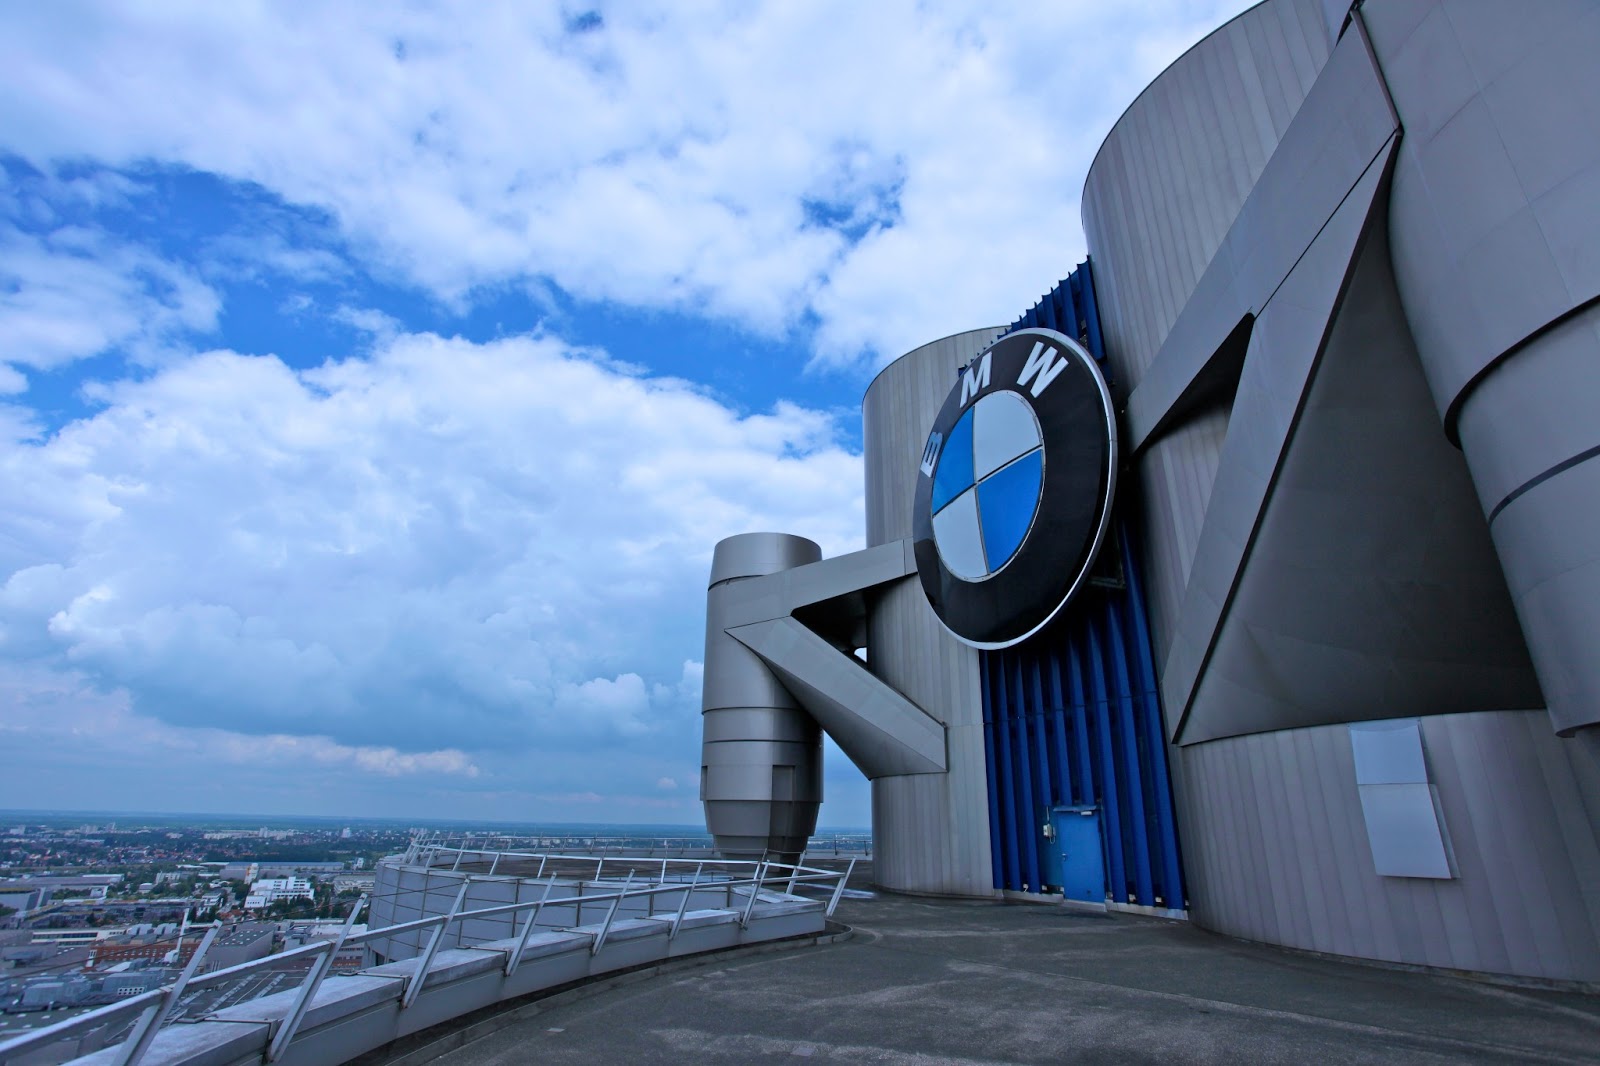 Bmw building in russia